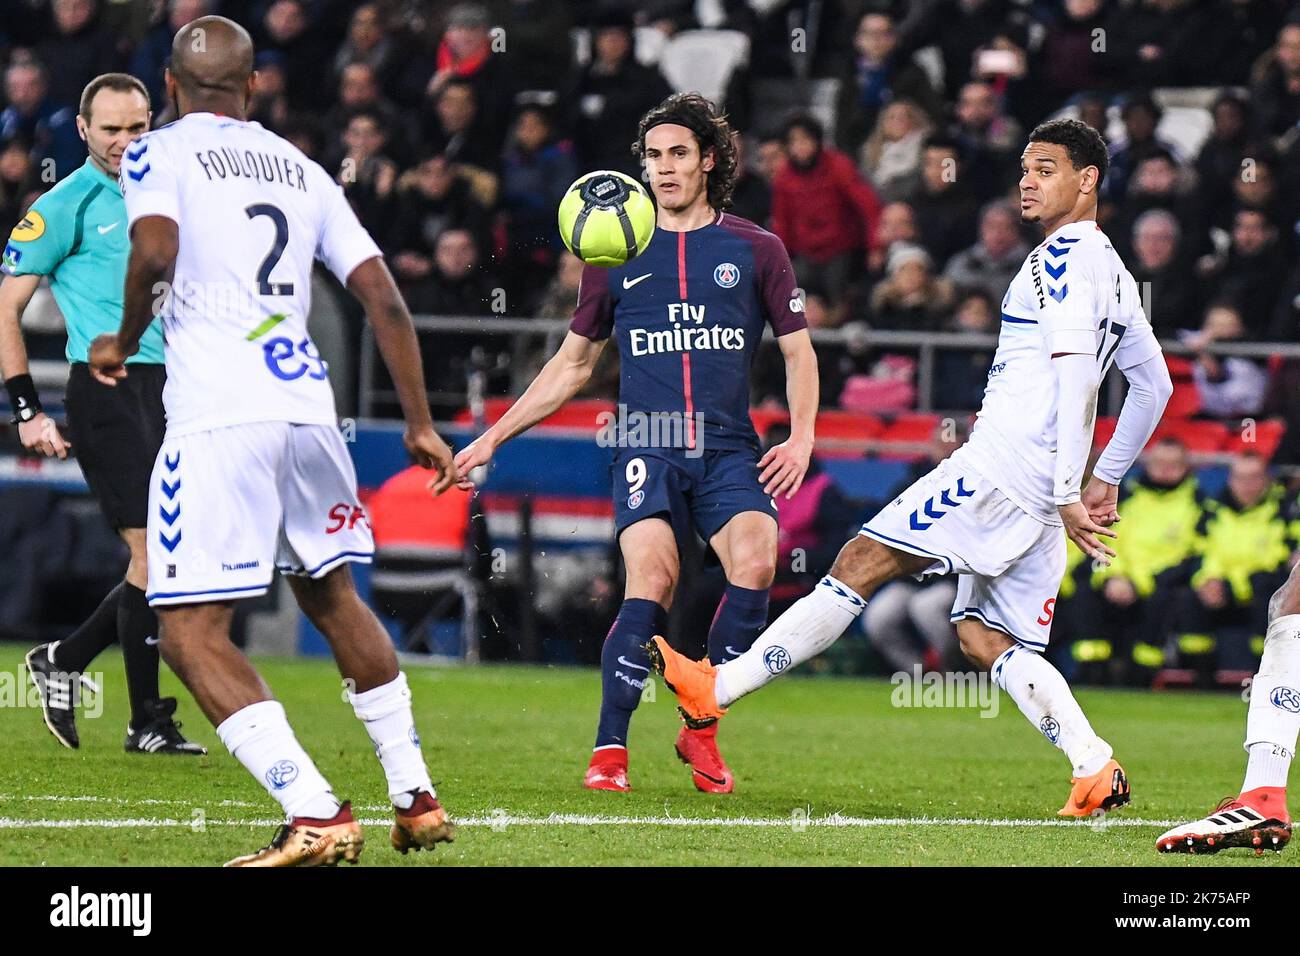 Paris Saint Germain's Edinson Cavani (C) in action against Dimitri Foulquier (L) and Anthony Goncalves of Strasbourg (R) during the French Ligue 1 soccer match between Paris Saint Germain (PSG) and Racing Club Strasbourg Alsace at the Parc des Princes stadium in Paris, France, 17 February 2018.  Stock Photo